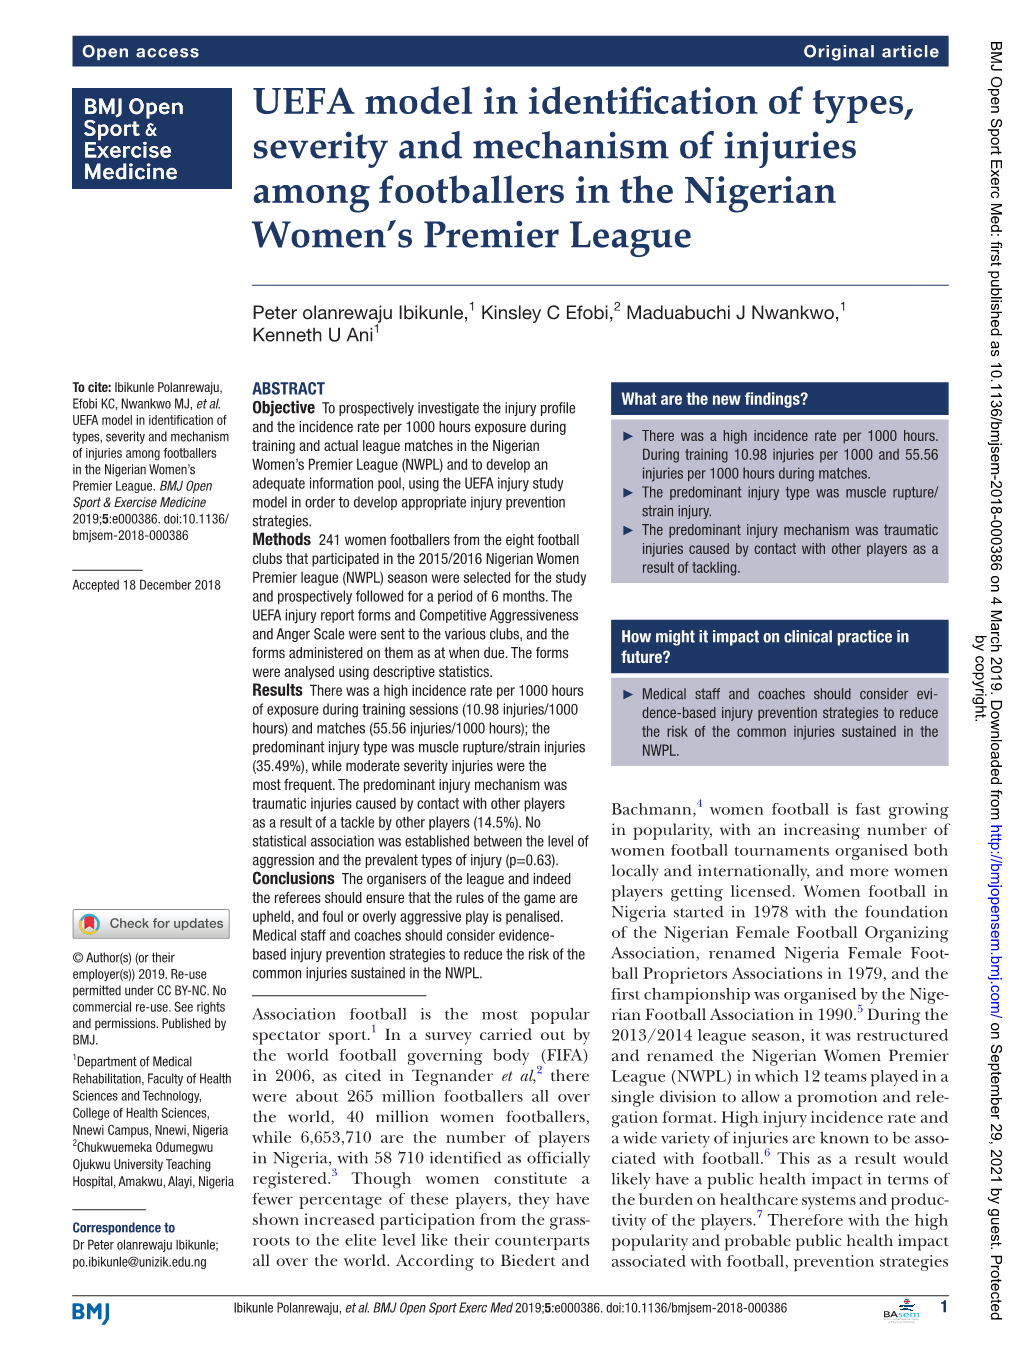 UEFA Model in Identification of Types, Severity and Mechanism of Injuries Among Footballers in the Nigerian Women’S Premier League